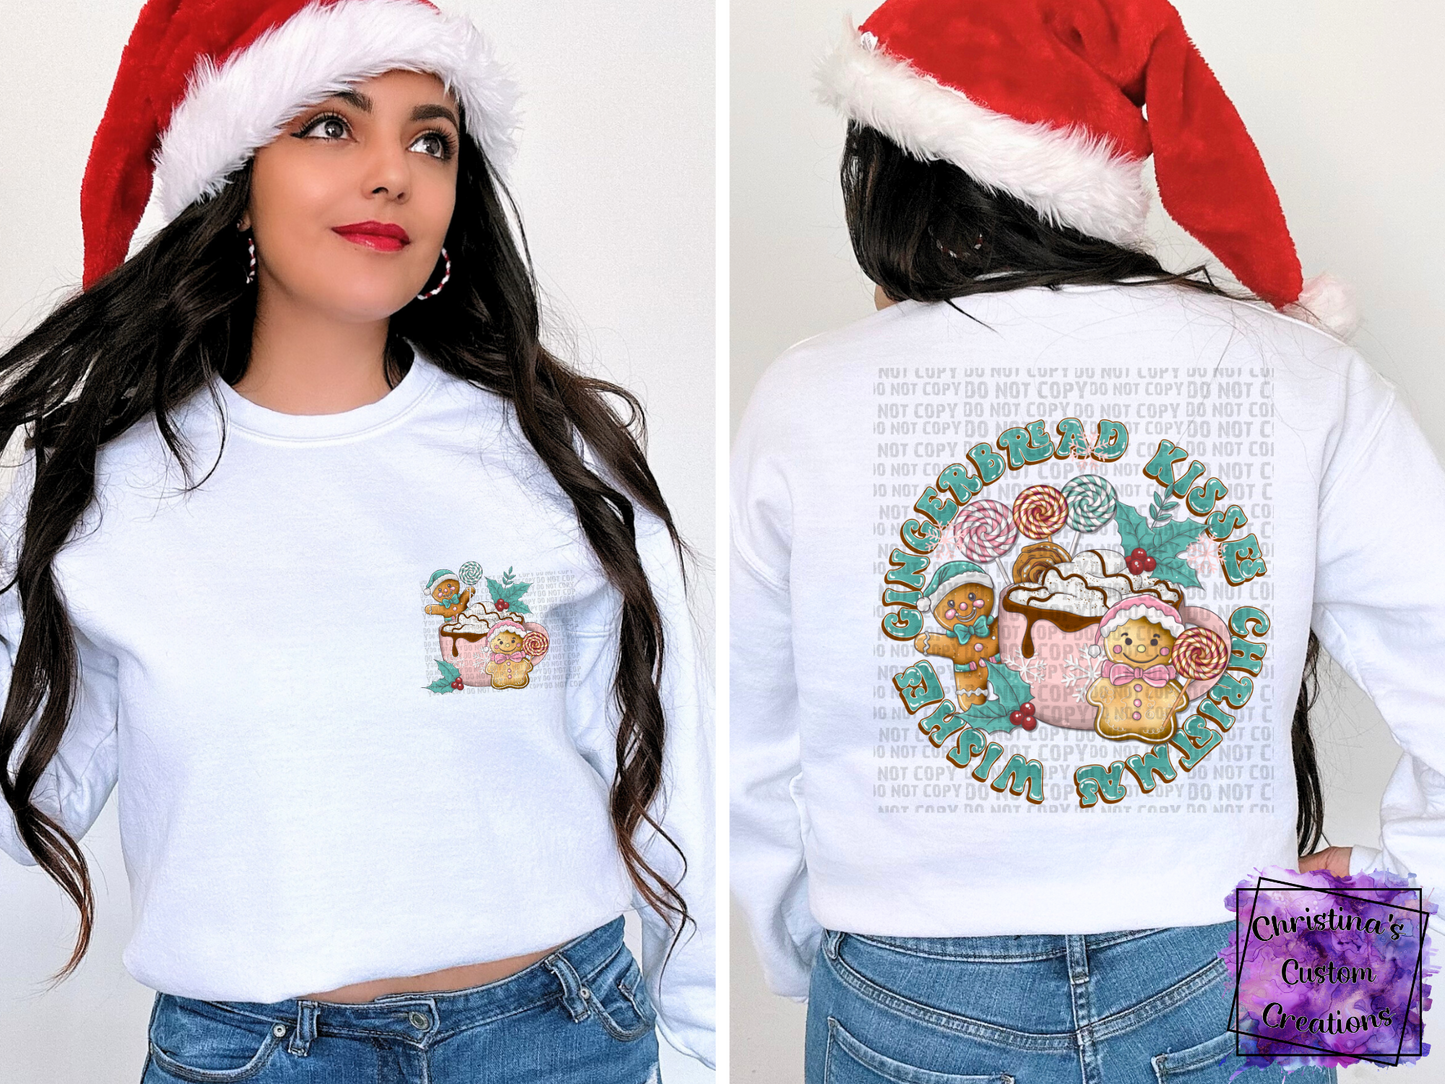 Gingerbread Kisses T-Shirt | Cute Christmas Shirt | Front and Back Shirt | Fast Shipping | Super Soft Shirts for Women/Kid's